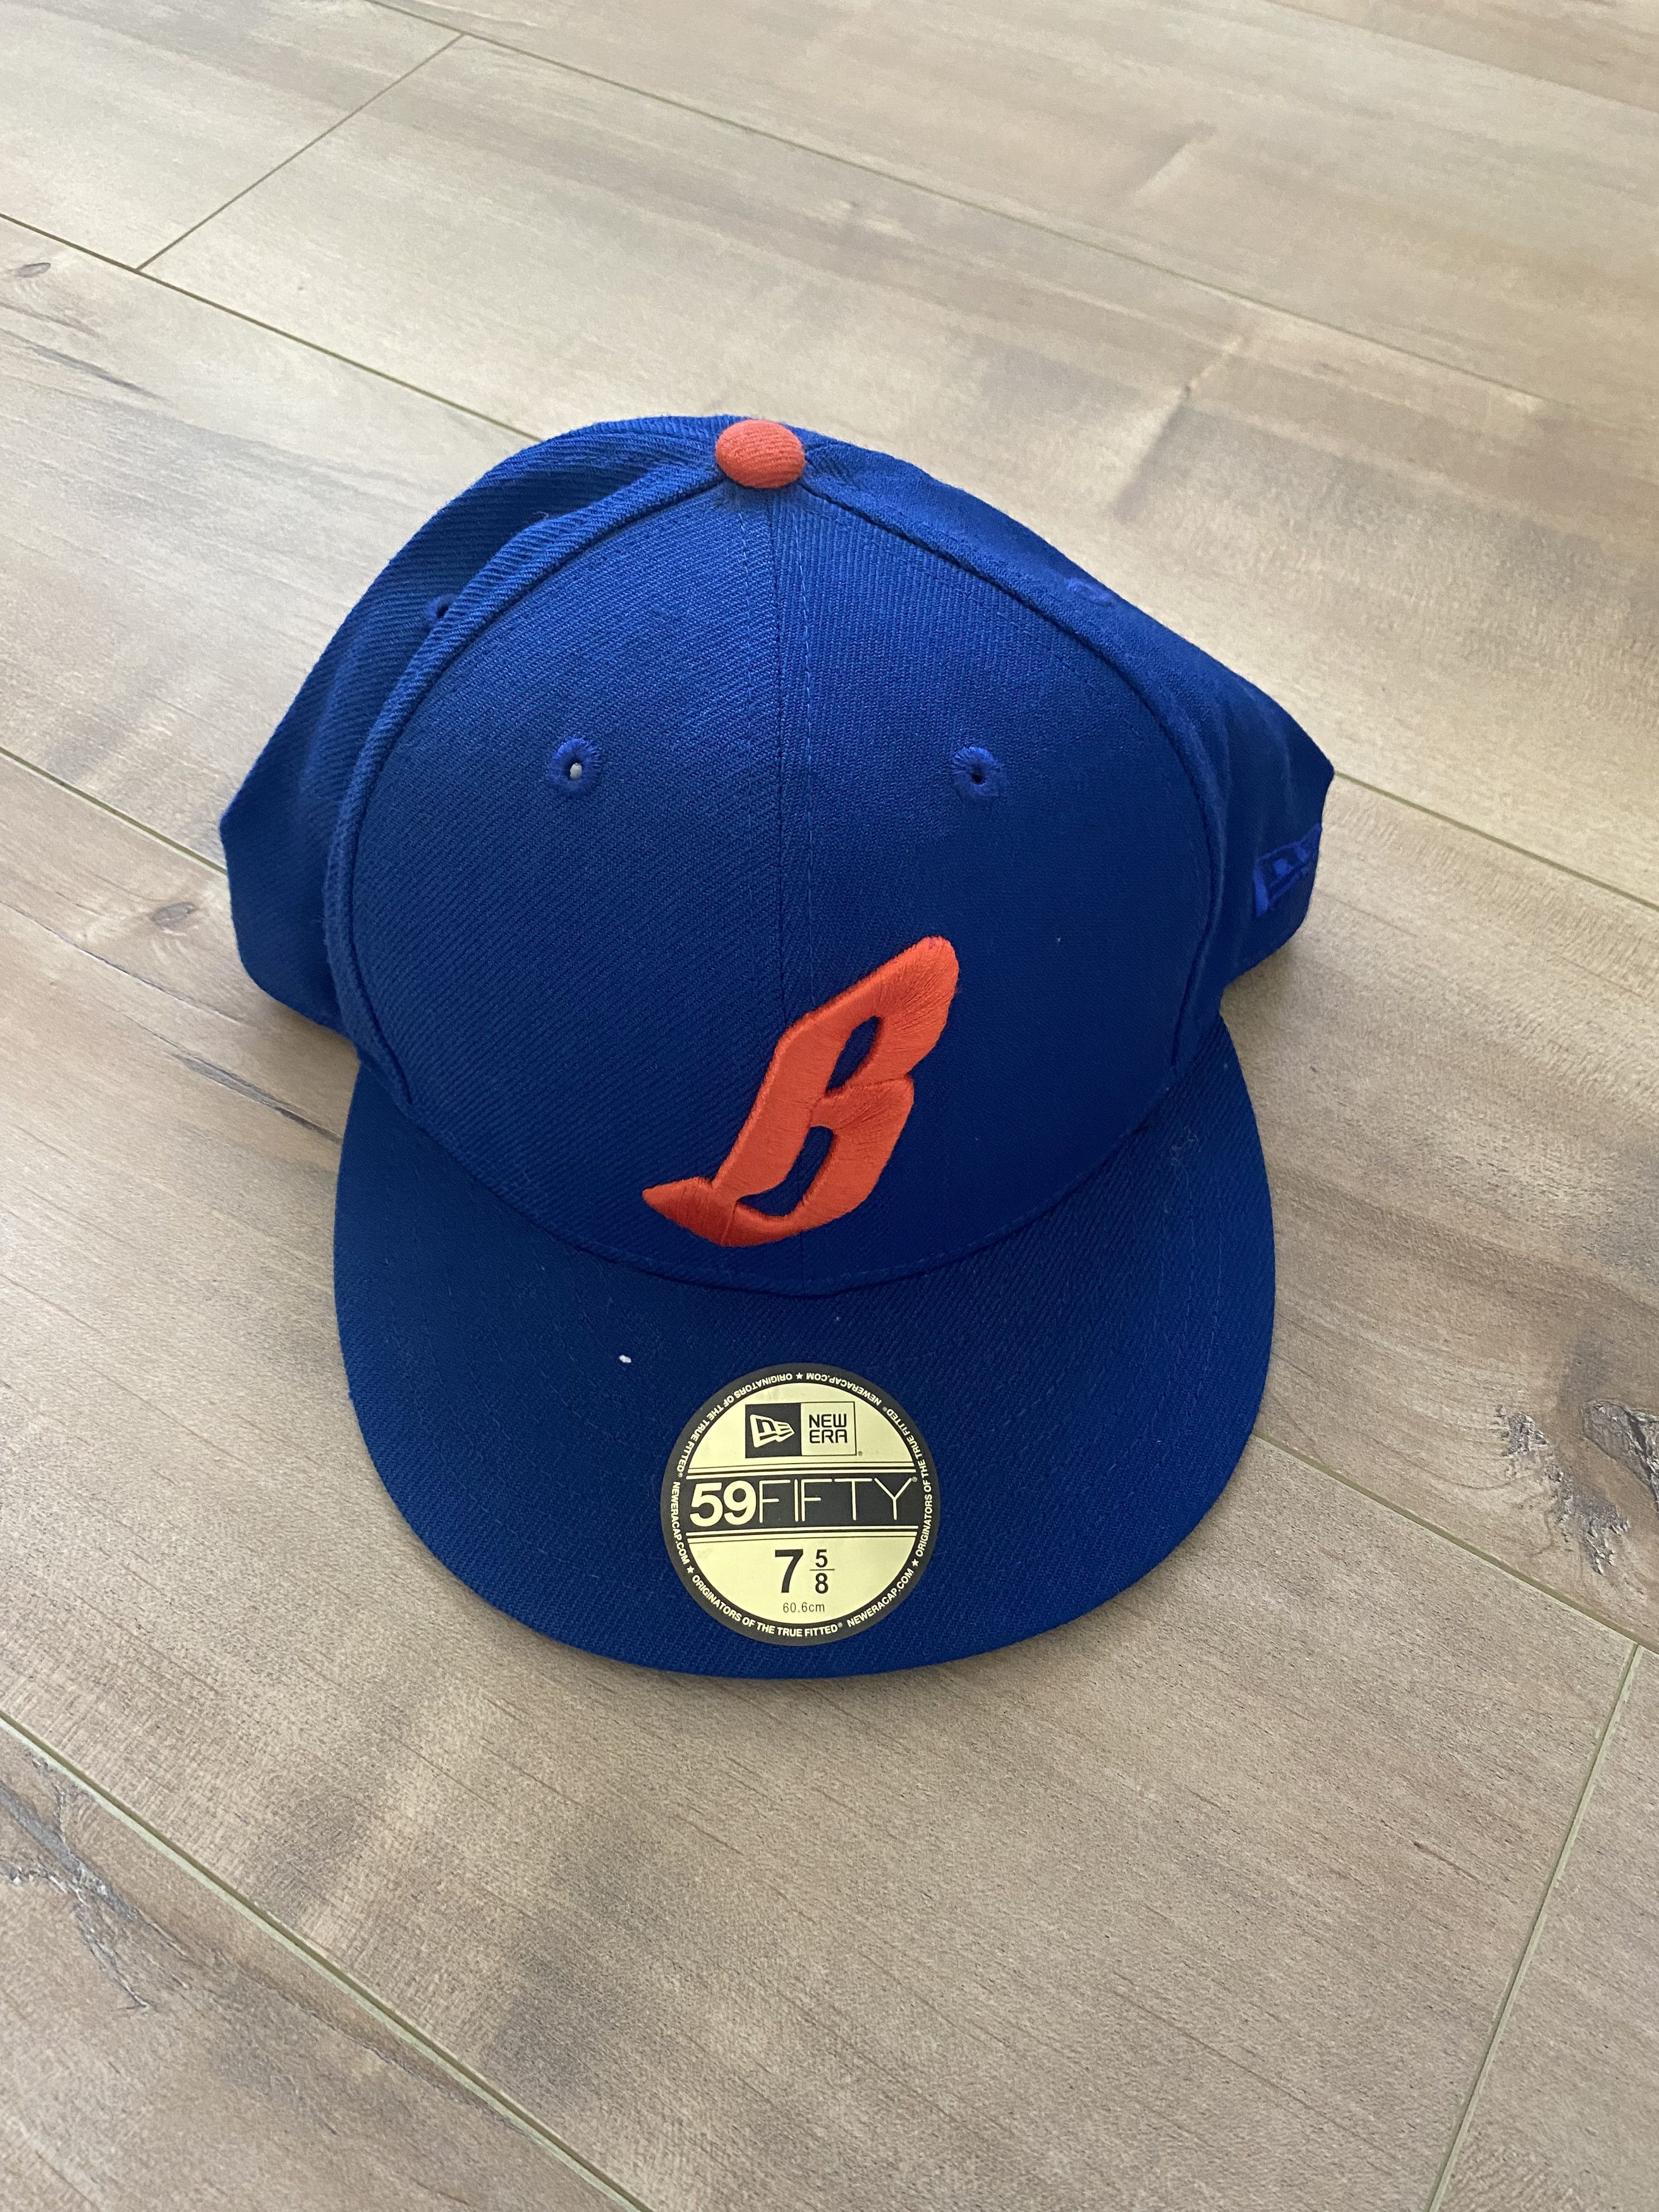 Billionaire Boys Club 7 5/8 Billionaire Boys Club Fitted Hat Size ONE SIZE - 1 Preview